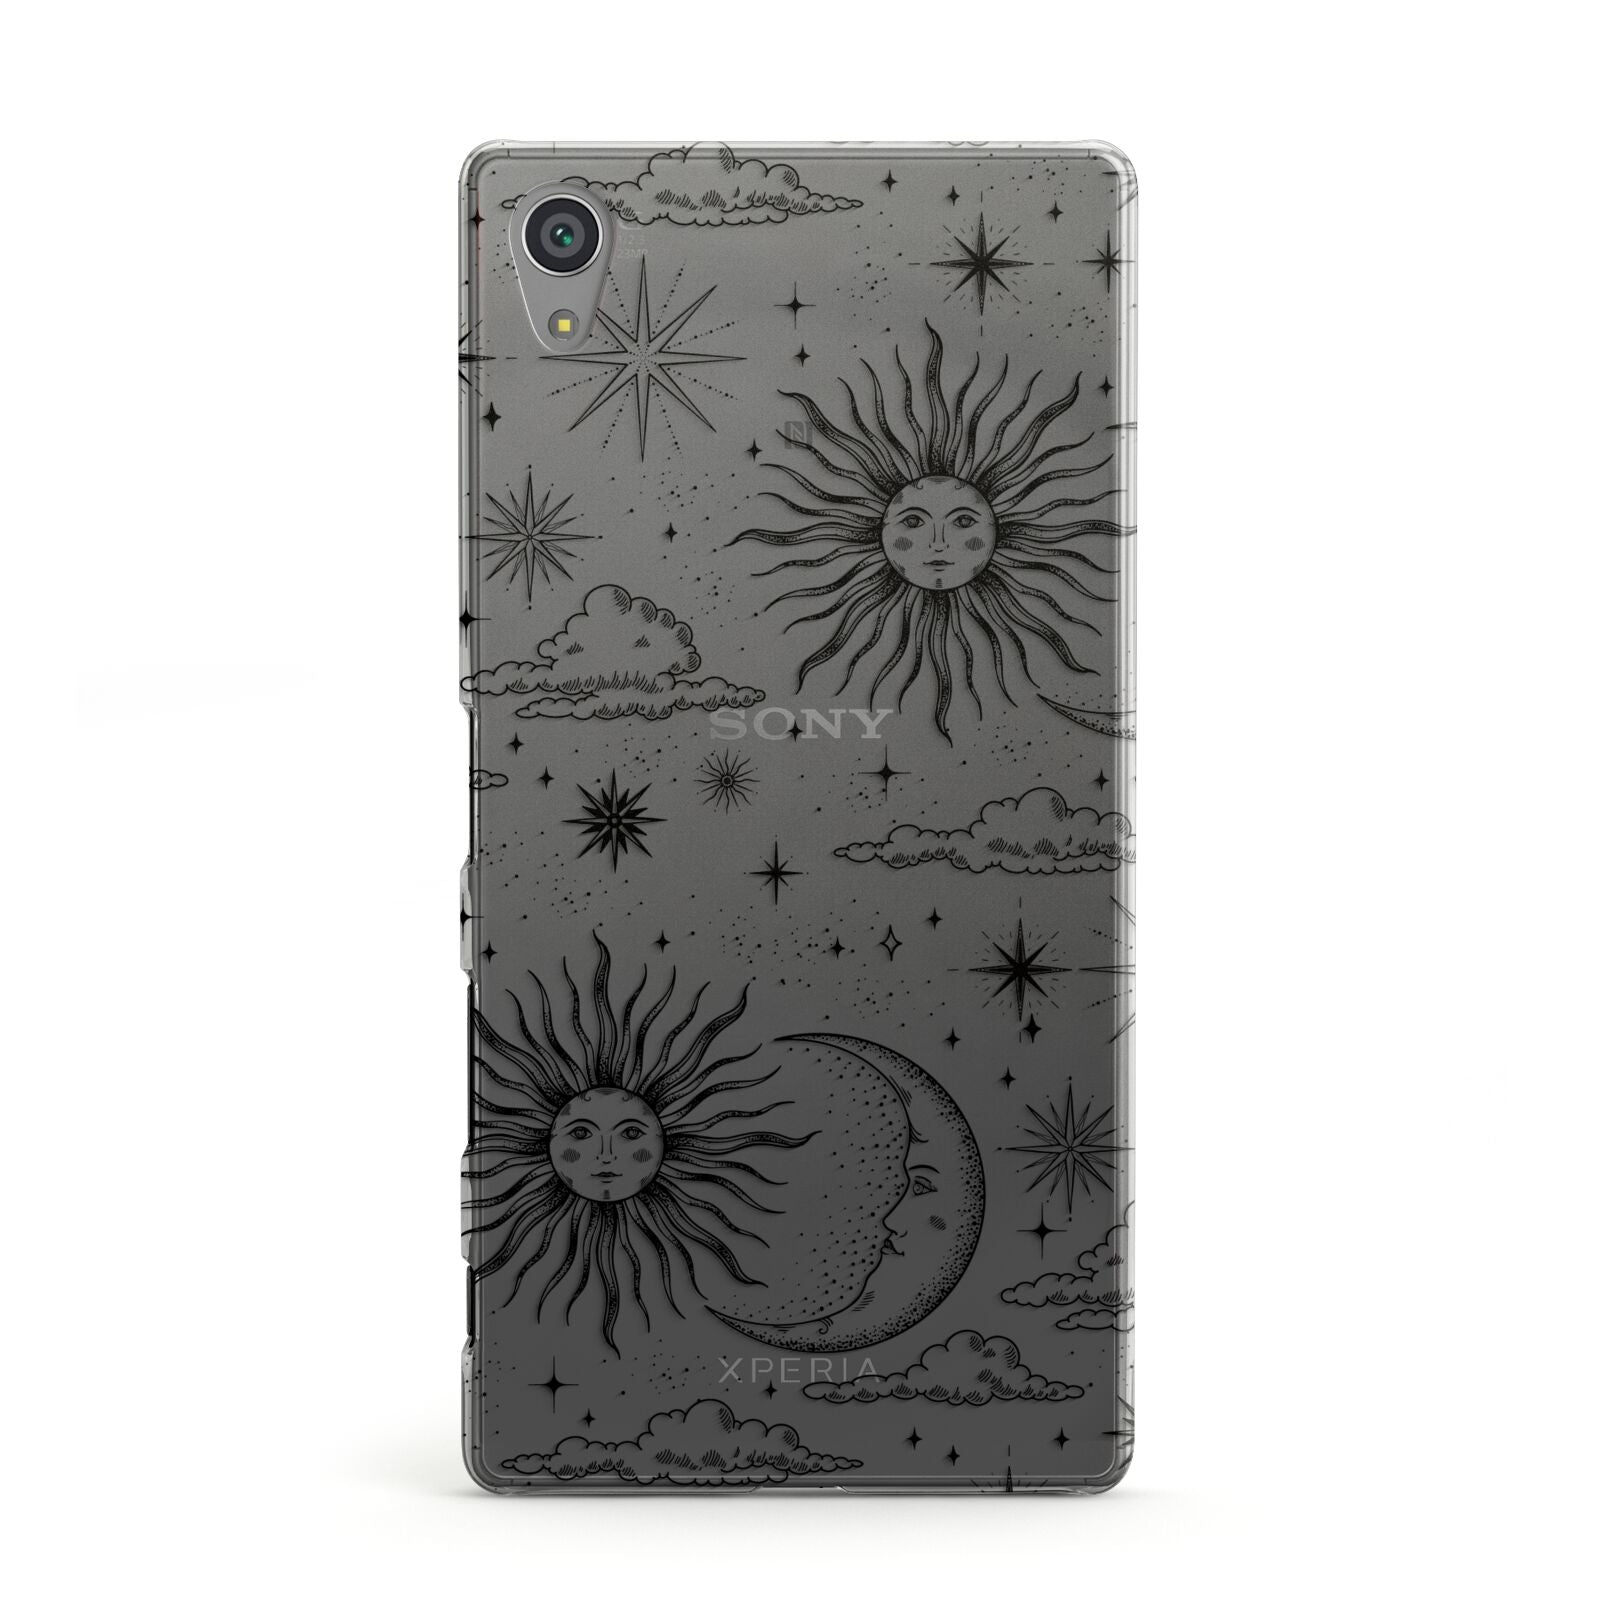 Celestial Suns Clouds Sony Xperia Case